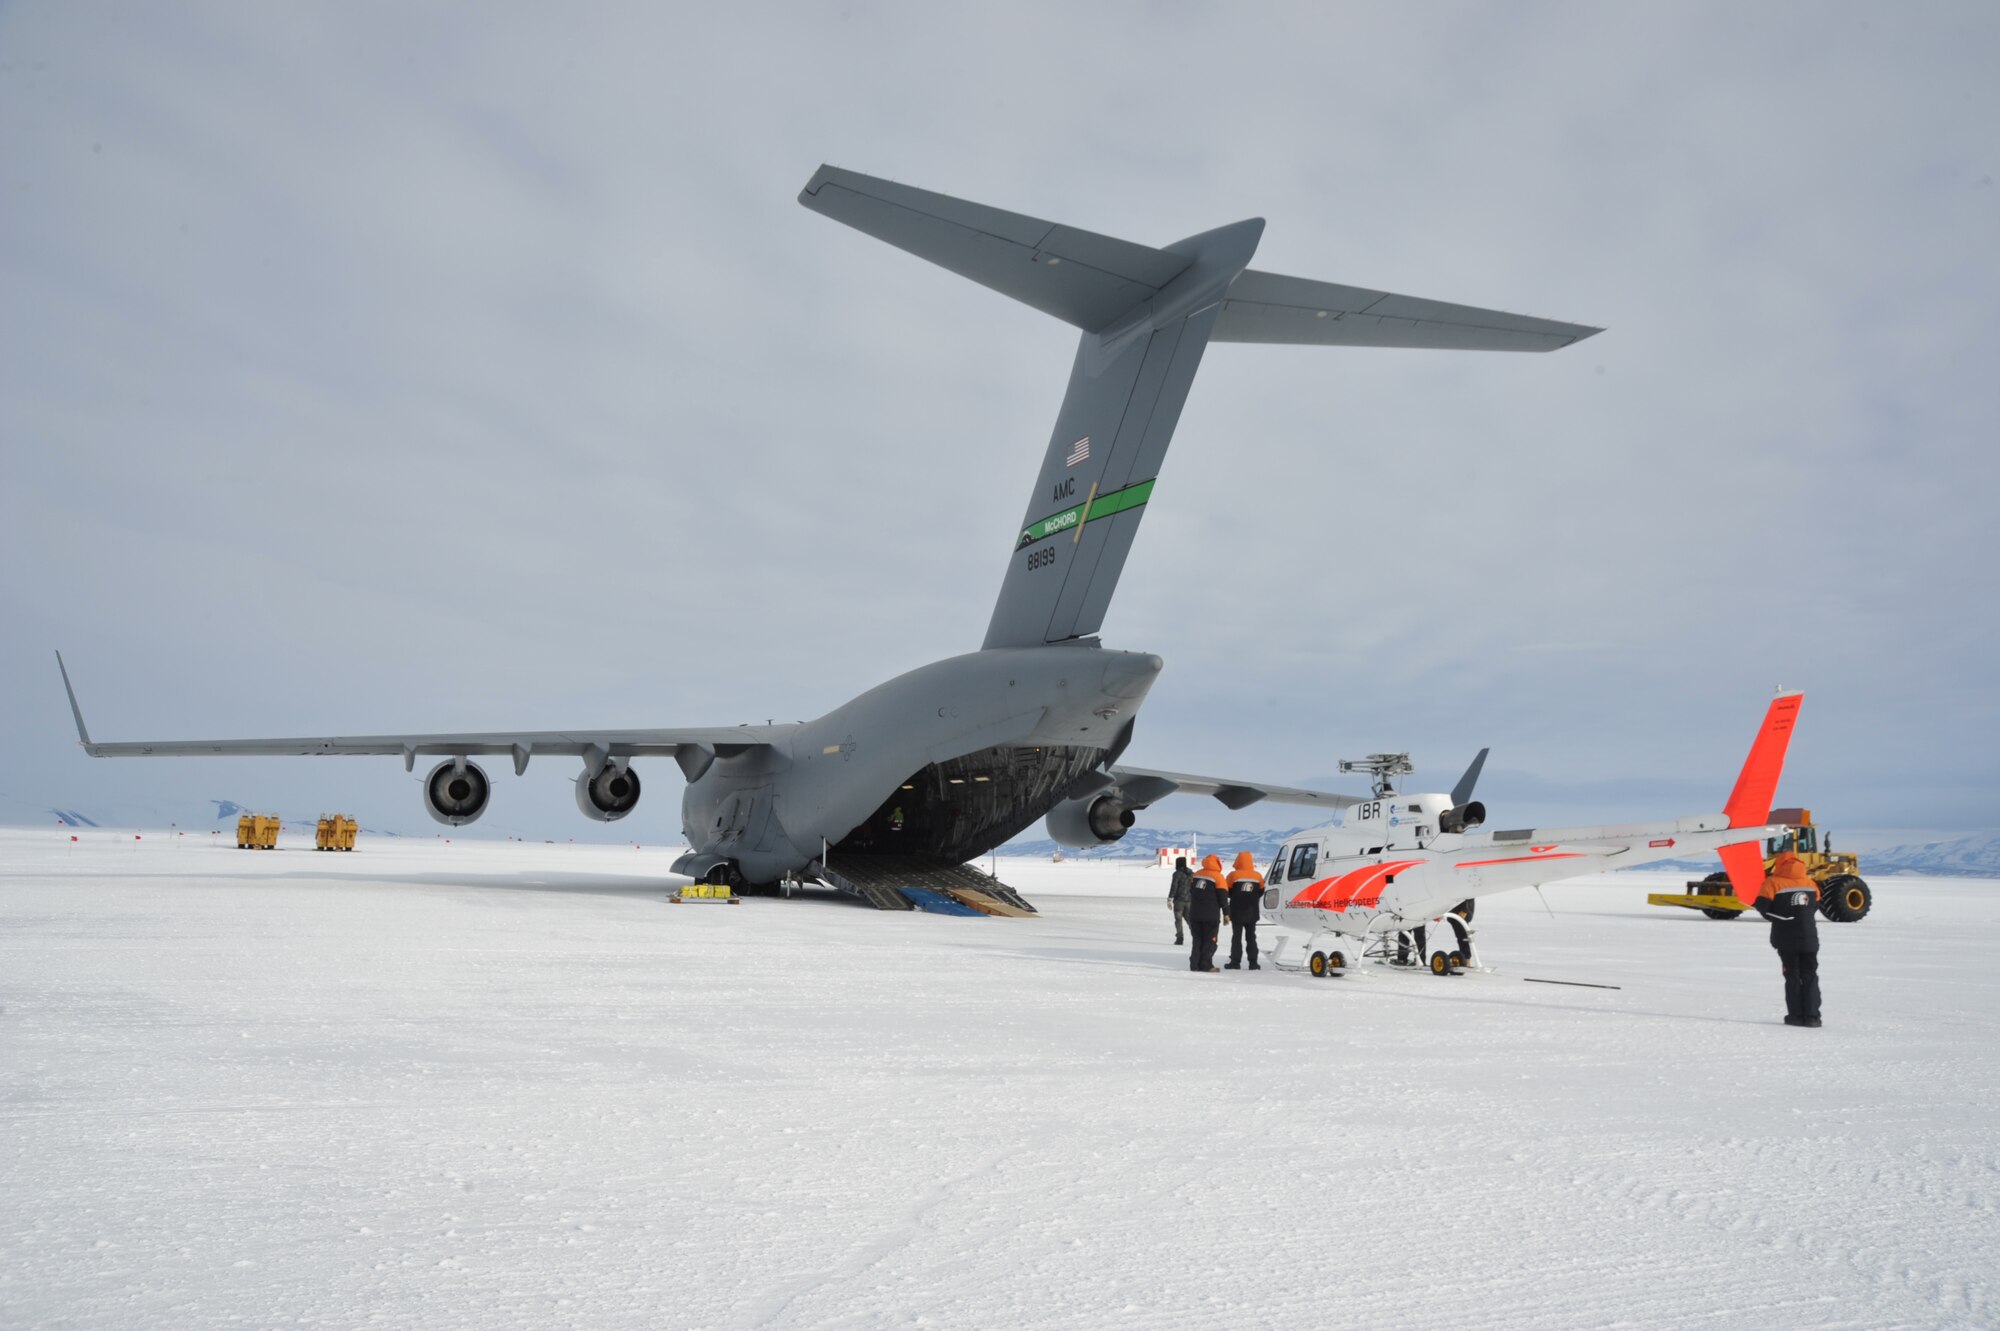 A Bell 212, operated by Antarctic New Zealand, is prepared to be loaded onto a C-17 Globemaster III Feb. 17, 2018 near McMurdo Station in Antarctica. Members of the 304th Expeditionary Airlift Squadron operated aircraft while supporting the U.S. Antarctic Program through Operation Deep Freeze. (Courtesy Photo)